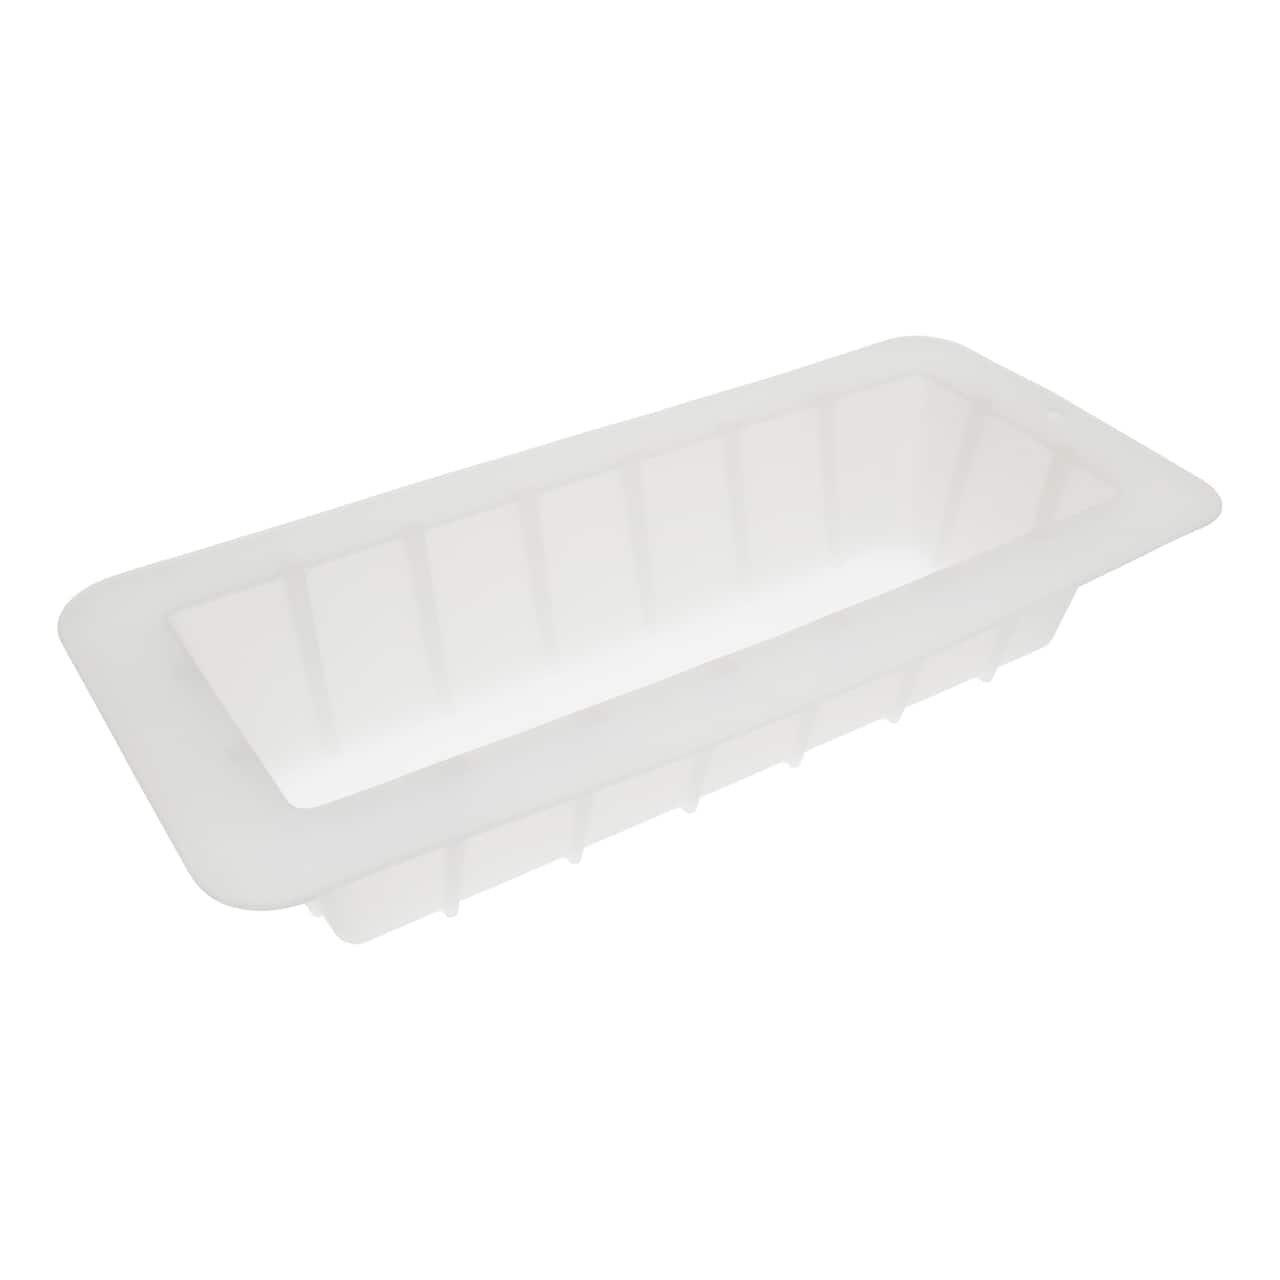 Silicone Loaf Soap Mold by Make Market®